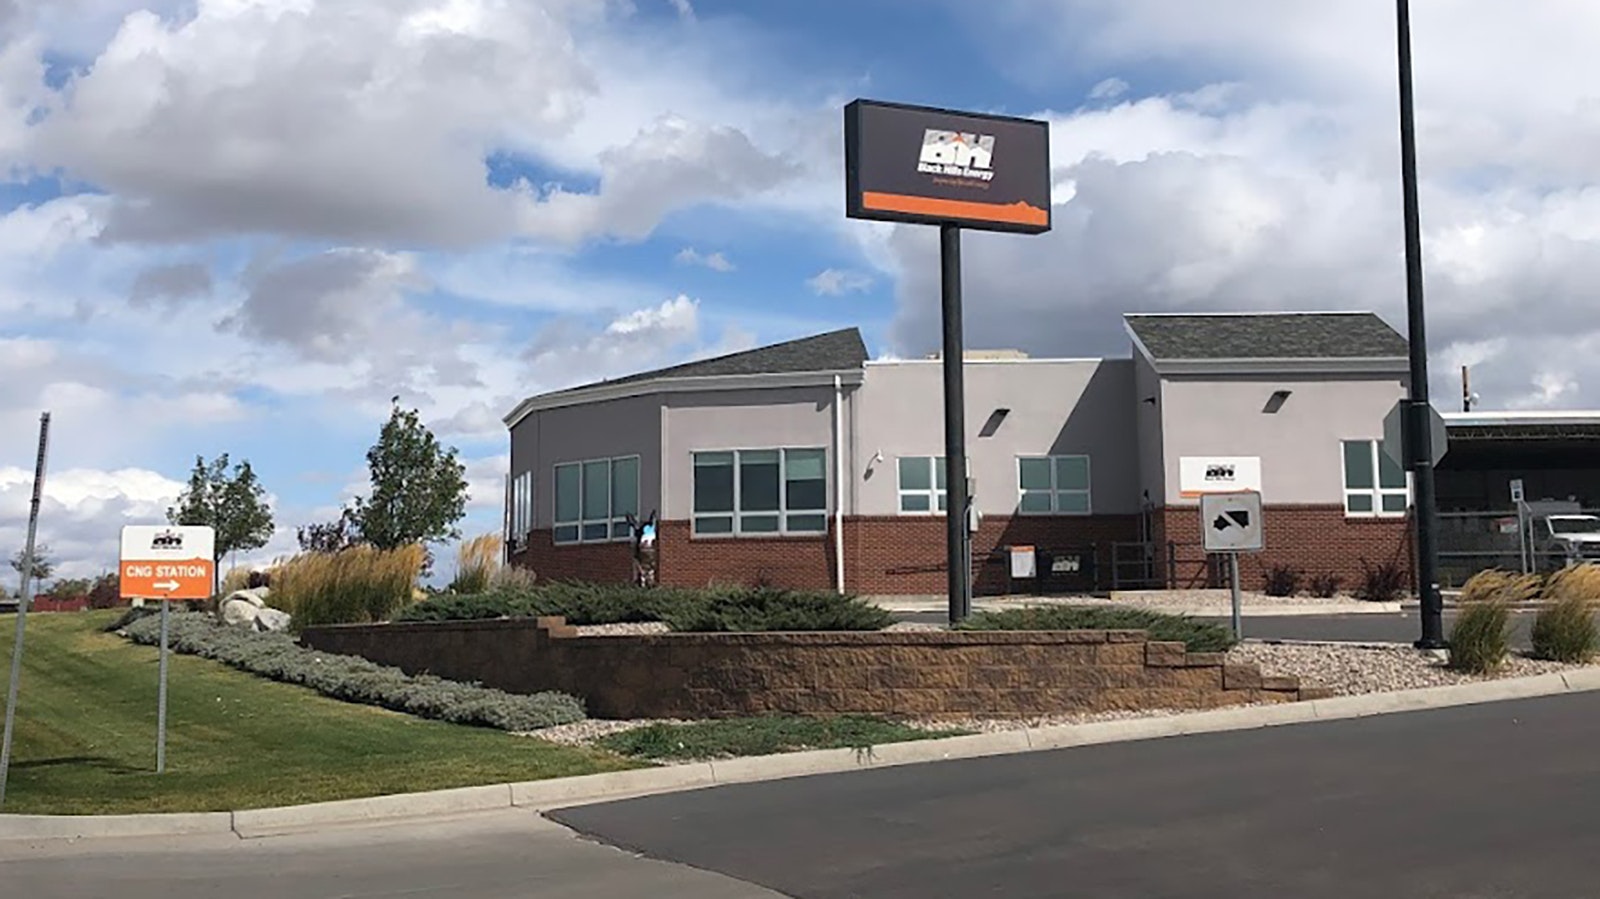 Black Hills Energy office at 1301 W. 24th St. in Cheyenne.